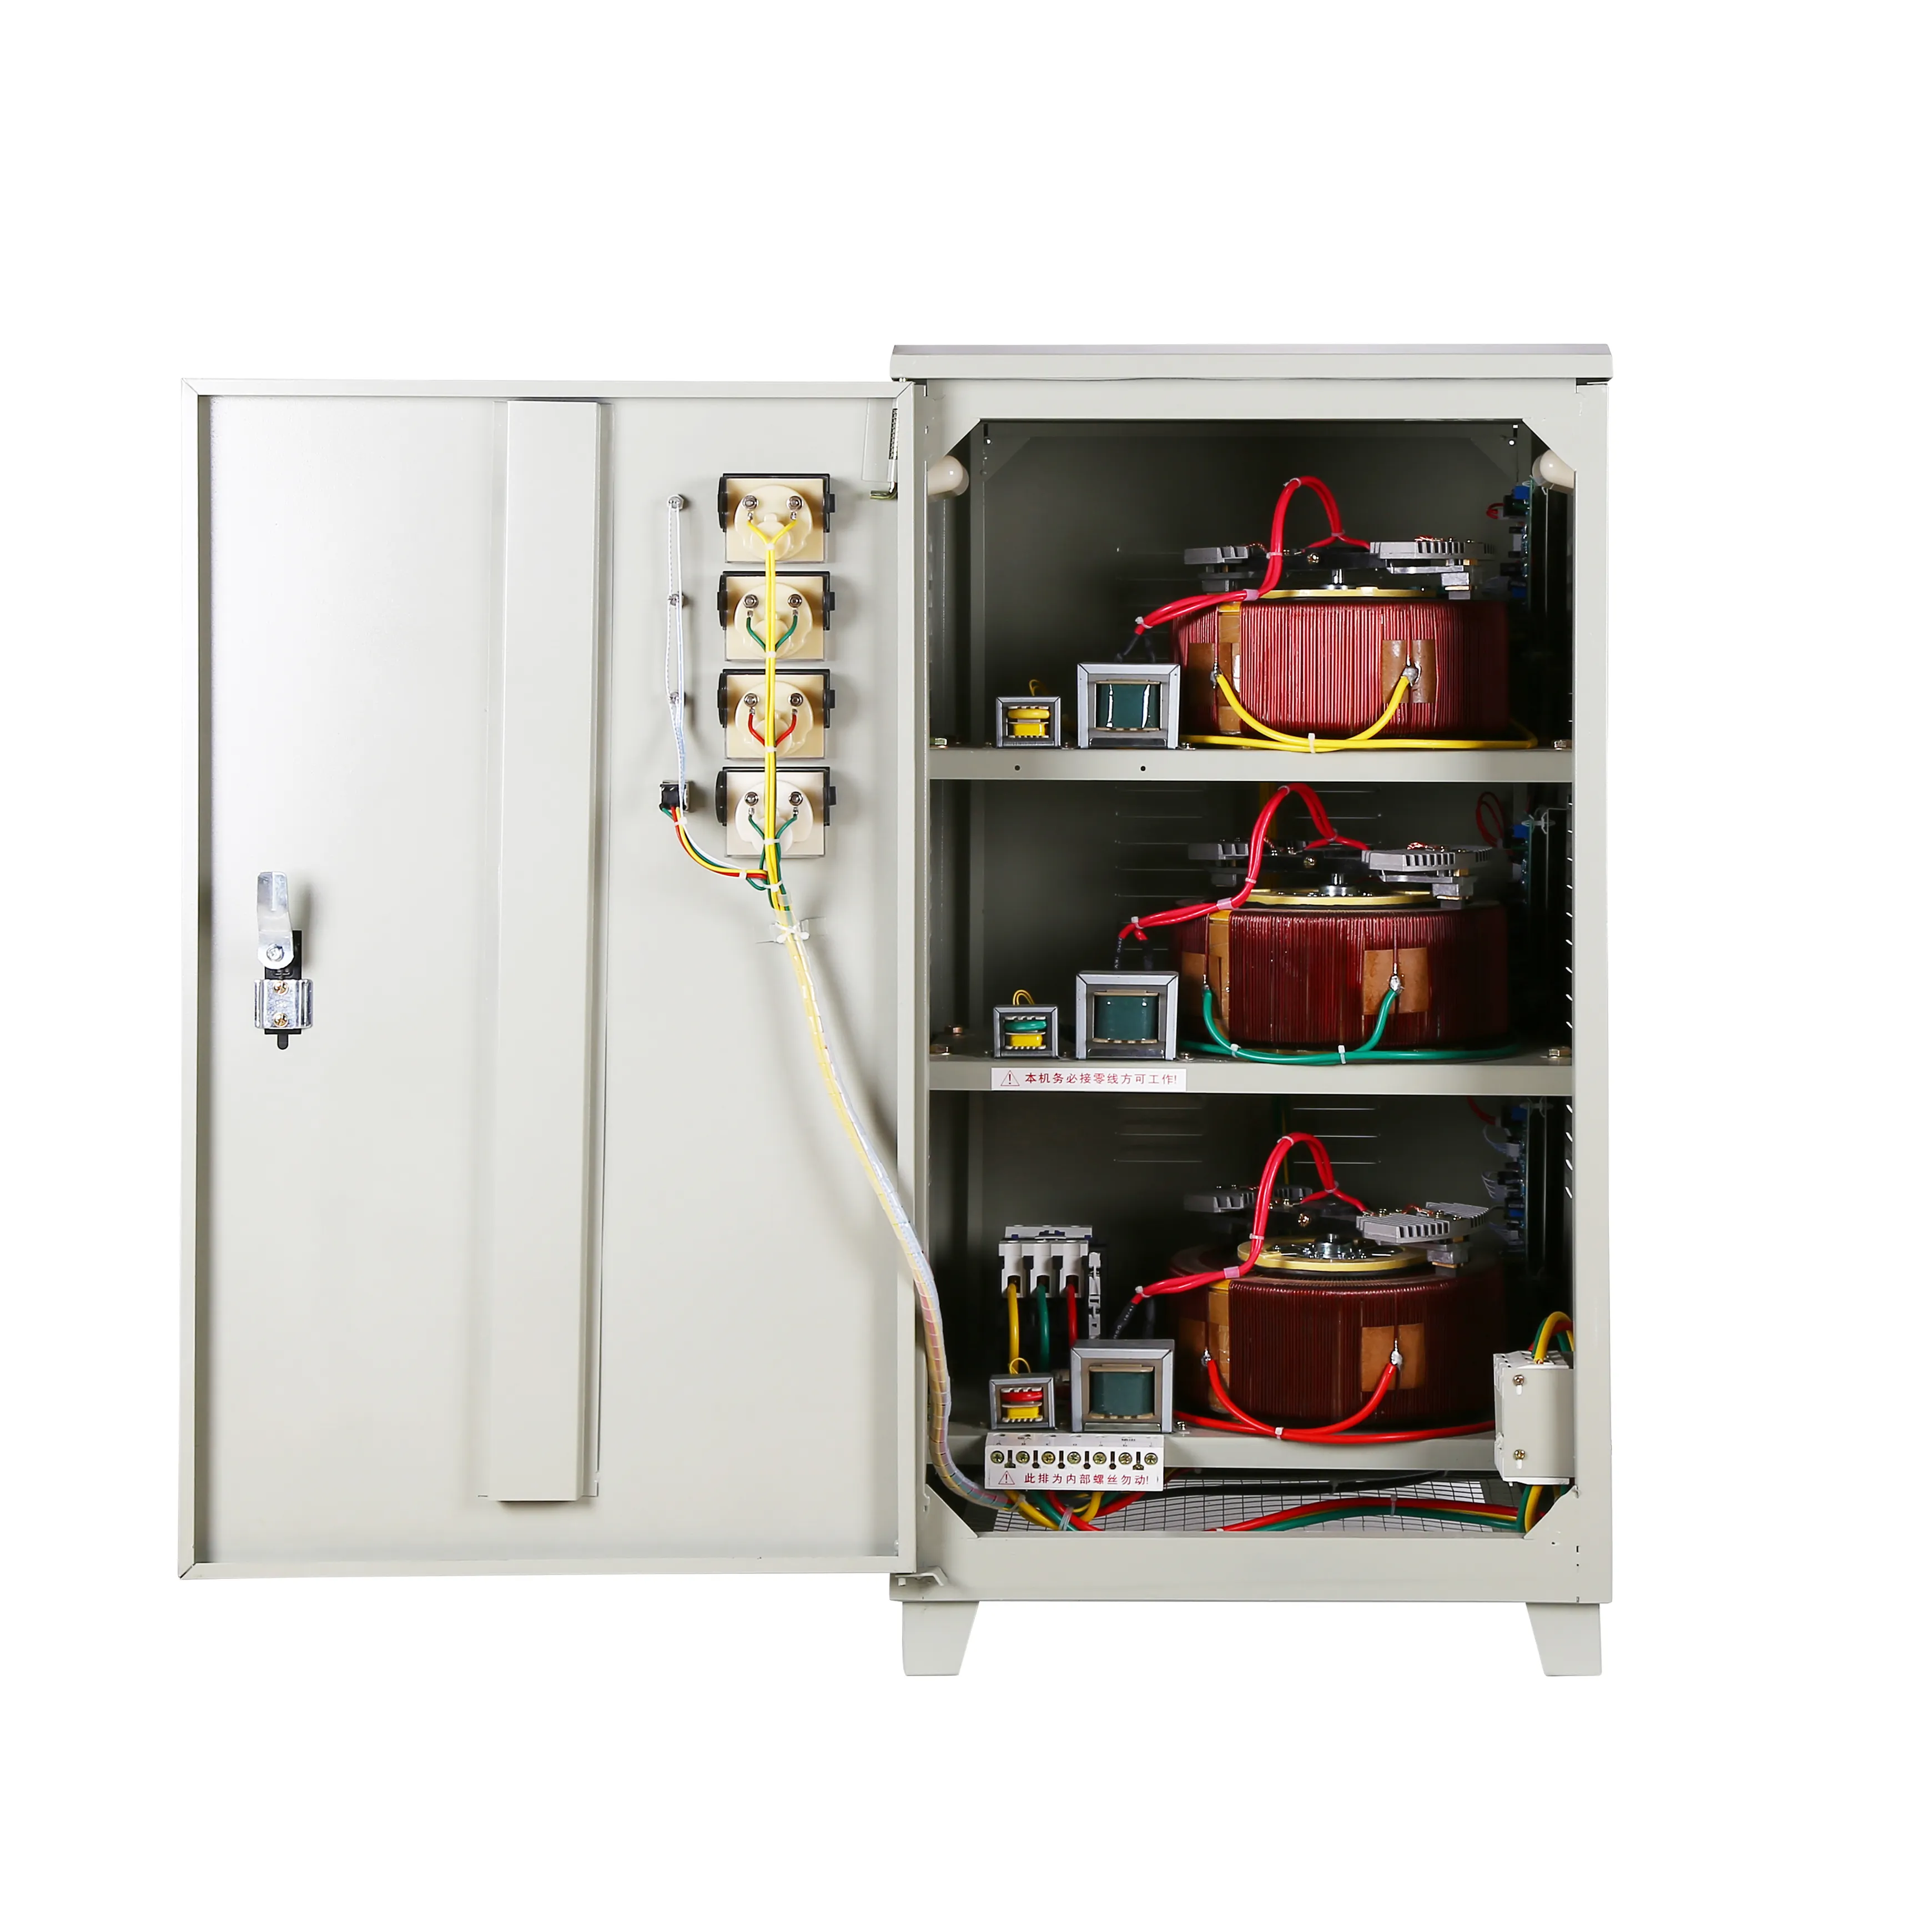 20kw automatic voltage stabilizer regulator single phase svc wall mounted voltage stabilizer